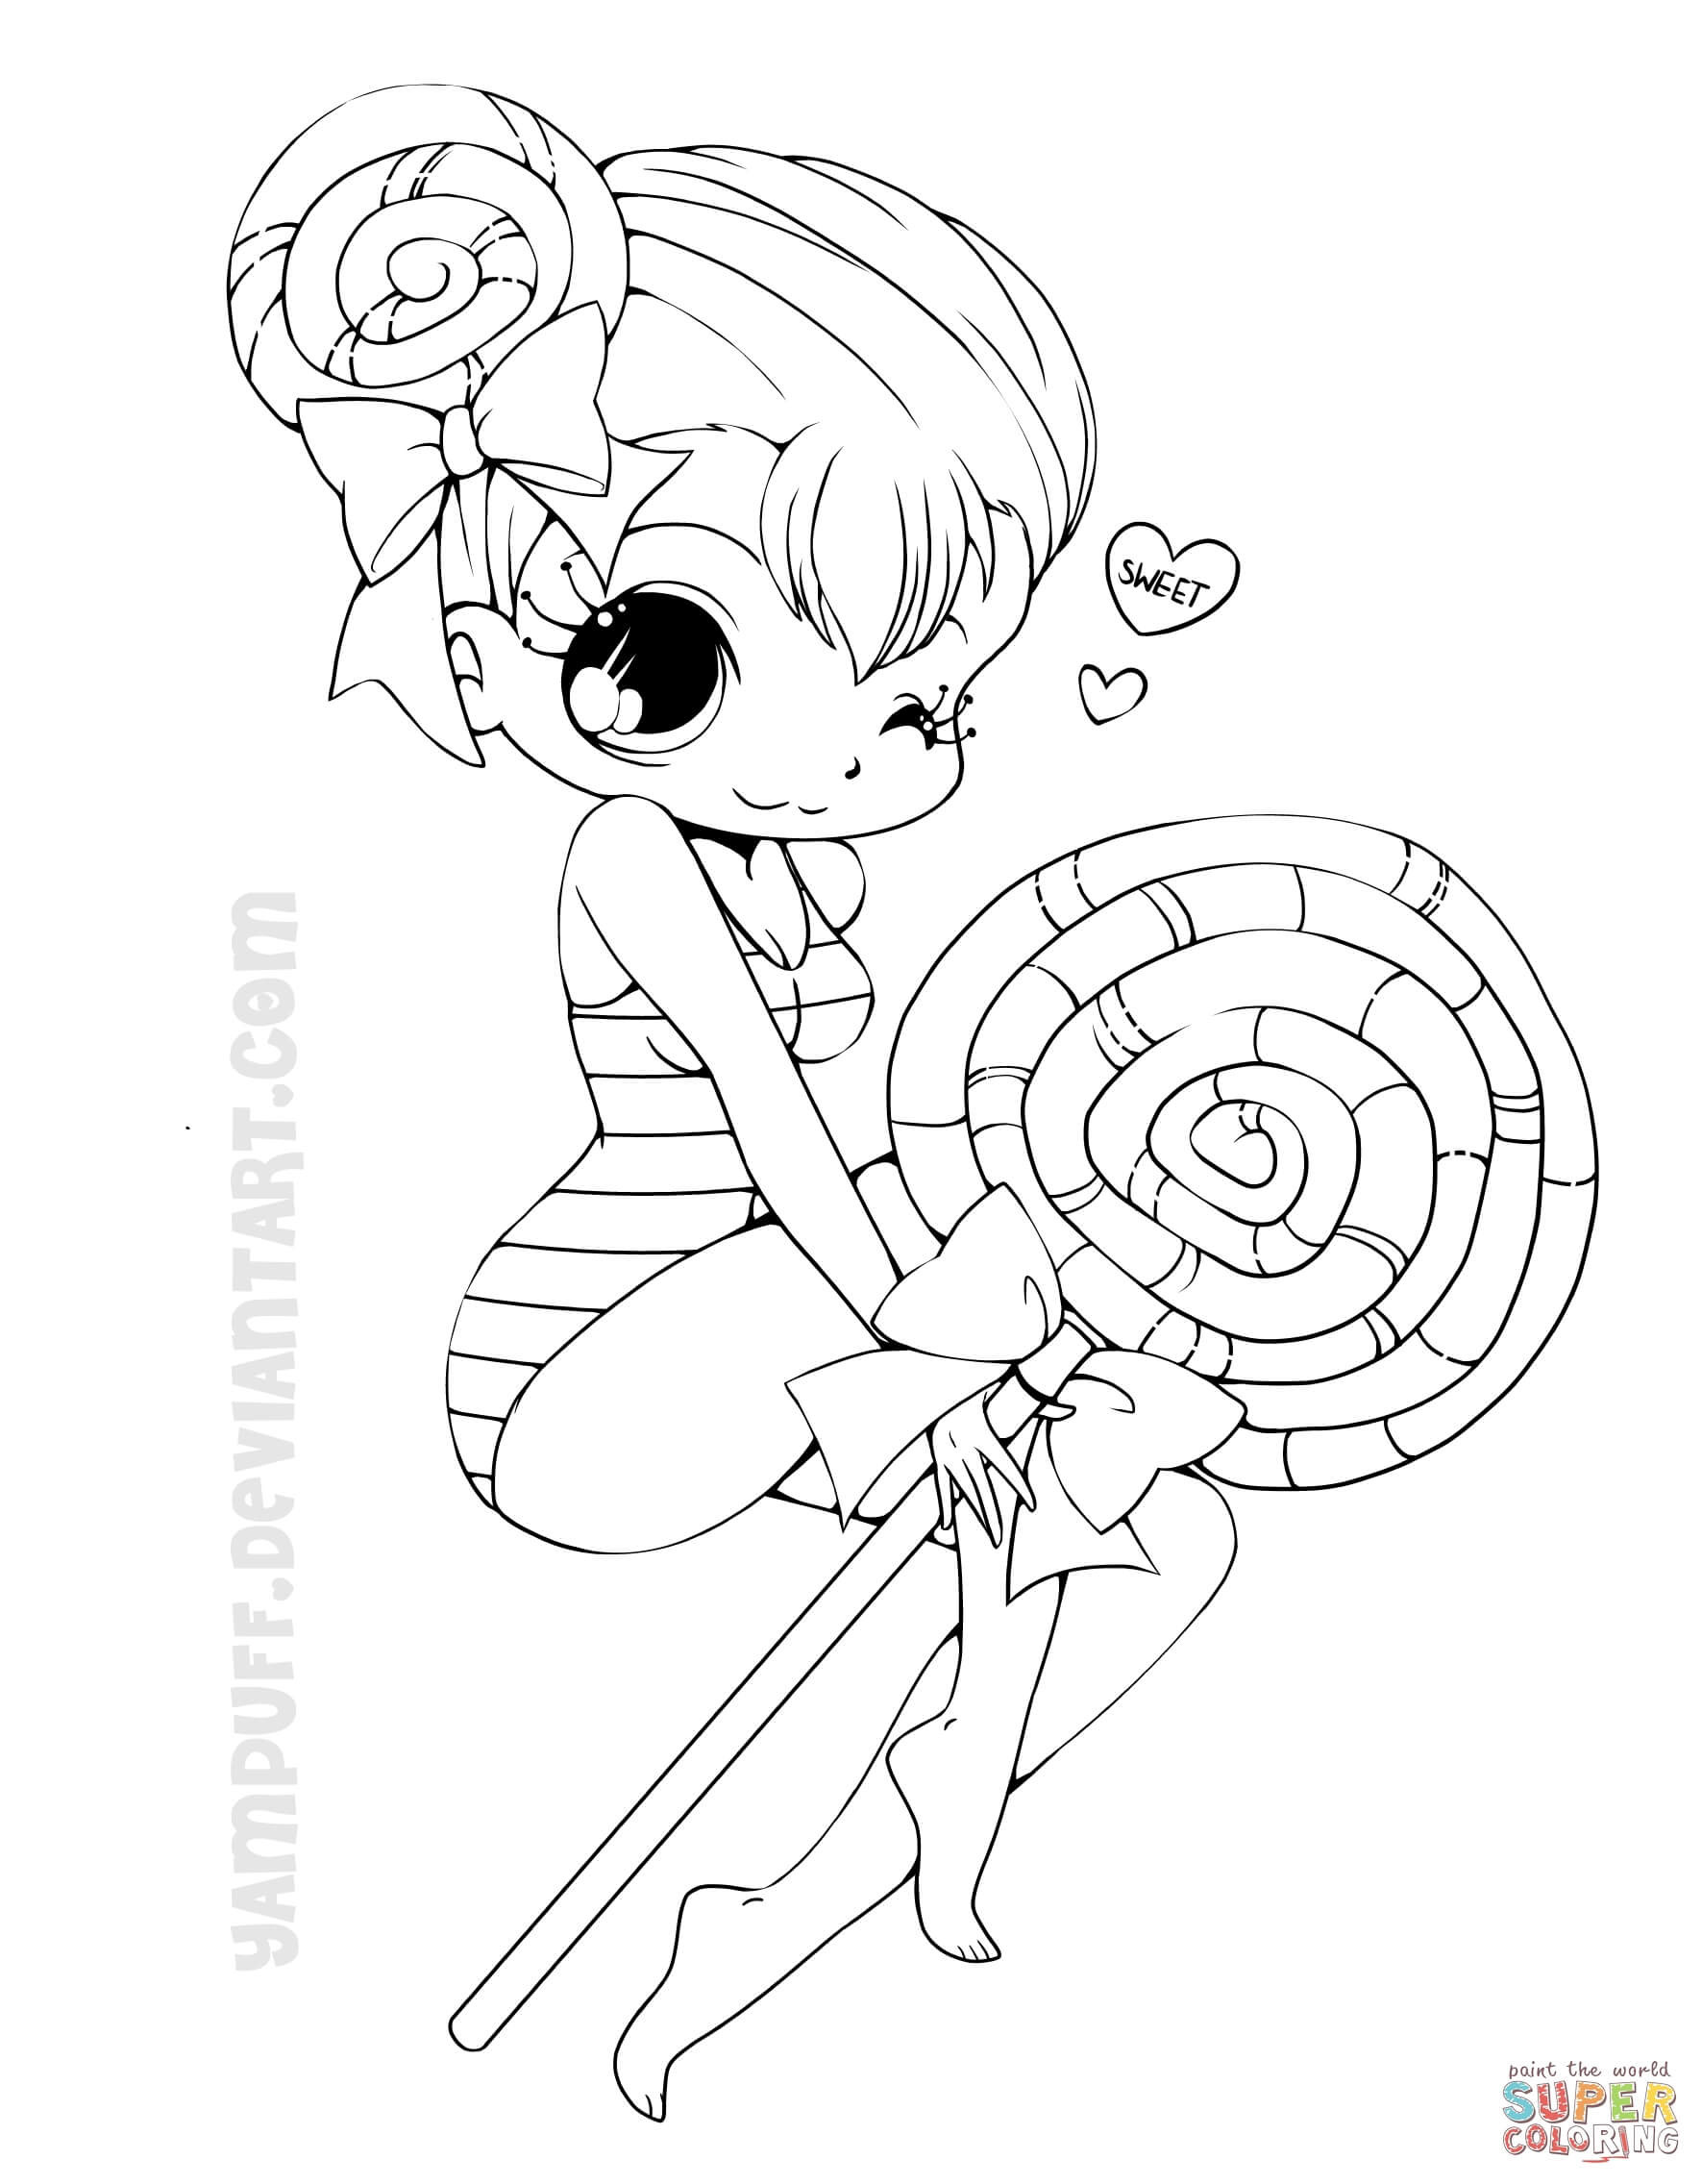 Chibi Coloring Pages With Three Girls
 Chibi Lollipop Girl coloring page